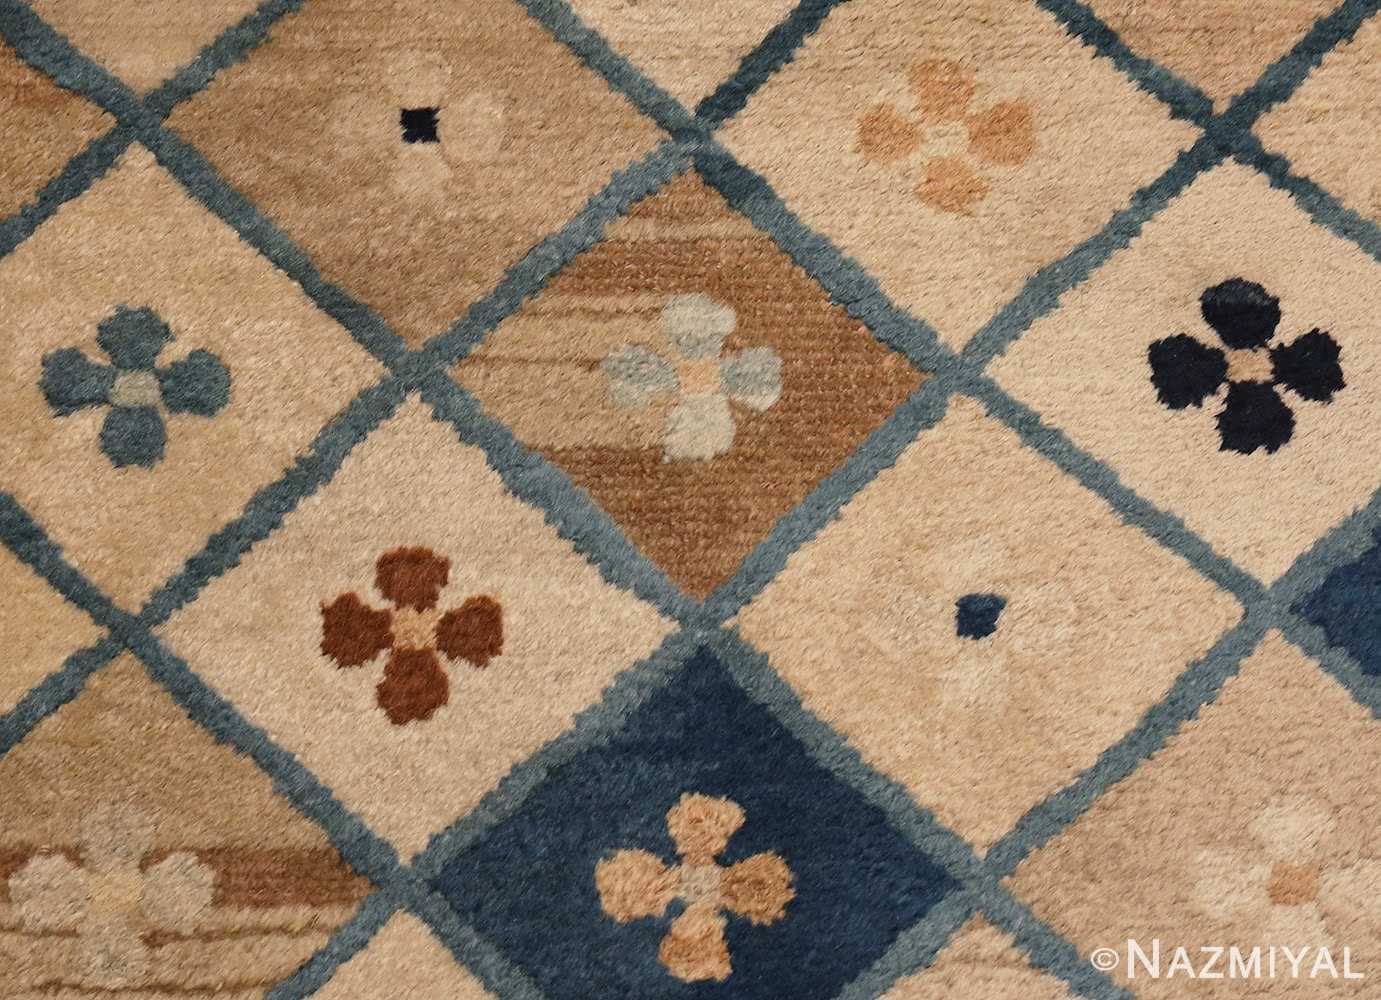 Detailed Picture of Small Antique Chinese Rug #46320 From Nazmiyal Antique Rugs In NYC